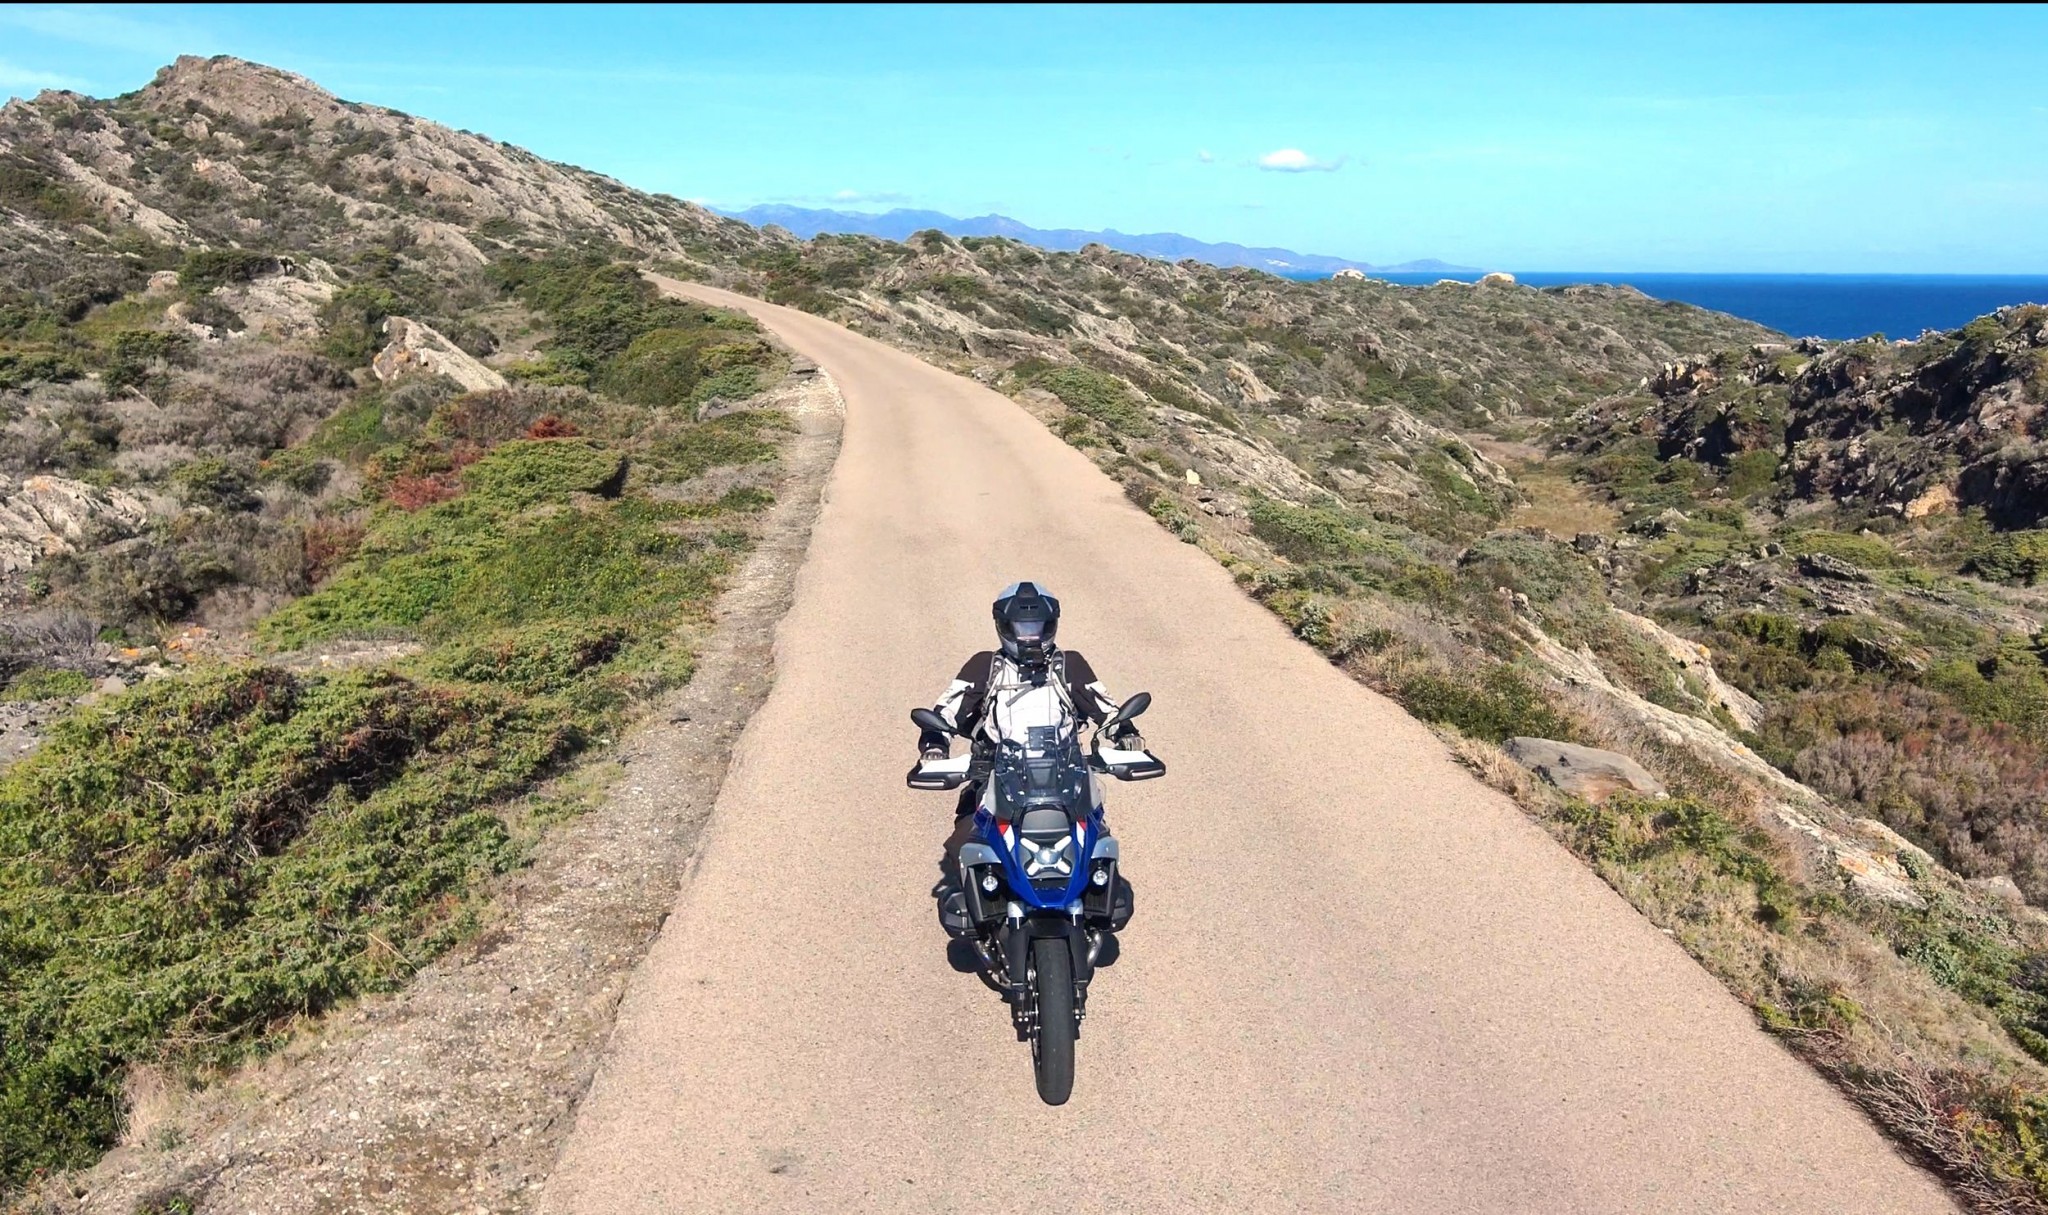 BMW R 1300 GS road test - from Barcelona to Vienna - Image 9